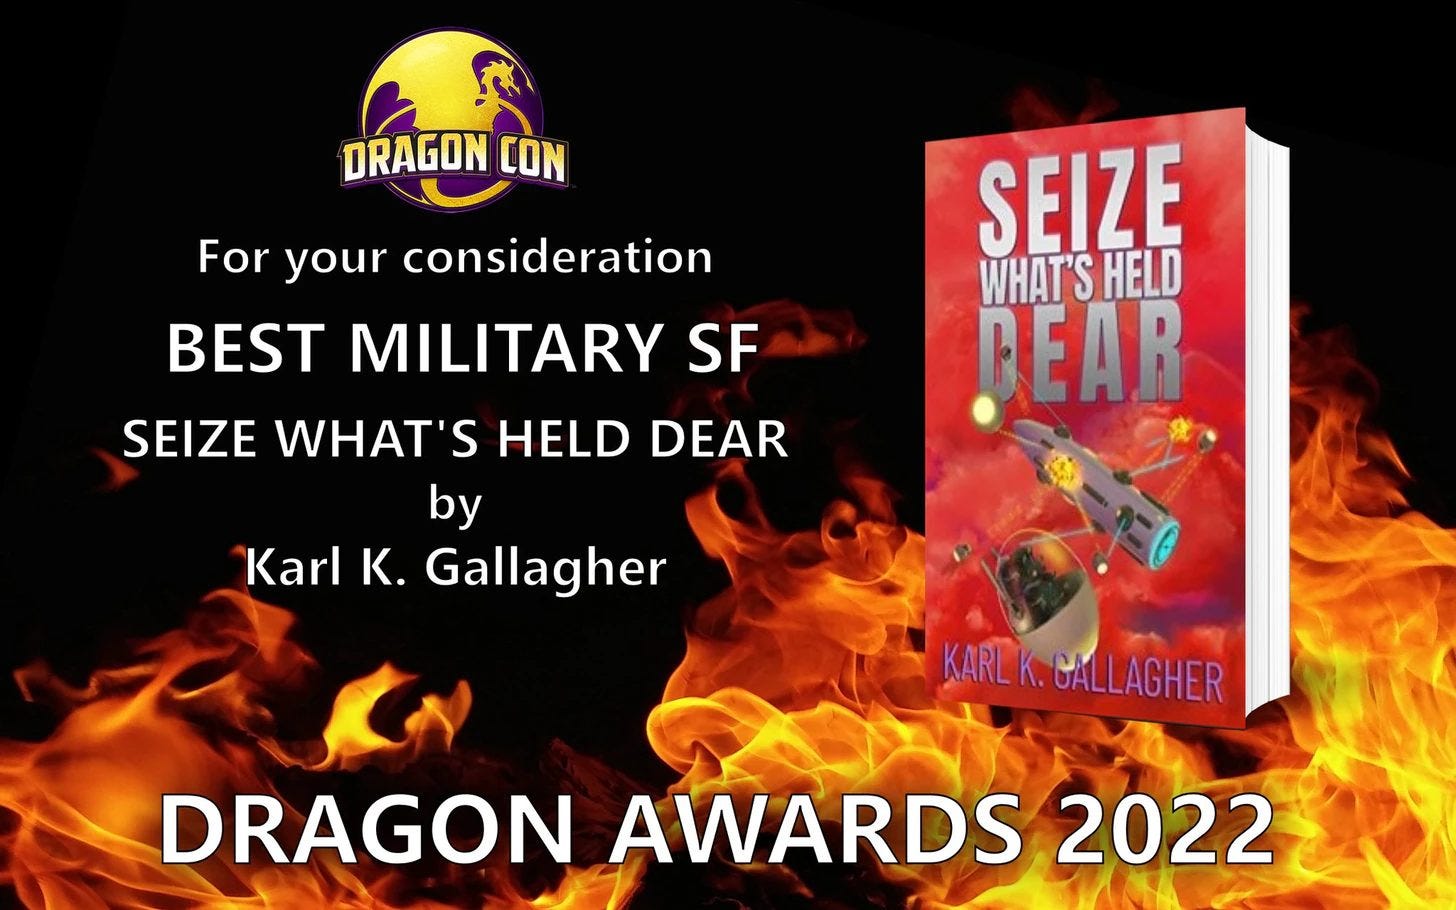 May be a cartoon of fire and text that says 'DRAGON CON For your consideration BEST MILITARY SF SEIZE WHAT'S HELD DEAR SEIZE WHAT'S HELD DEAR by Karl Κ. Gallagher KARL GALLAGHER DRAGON AWARDS 2022'